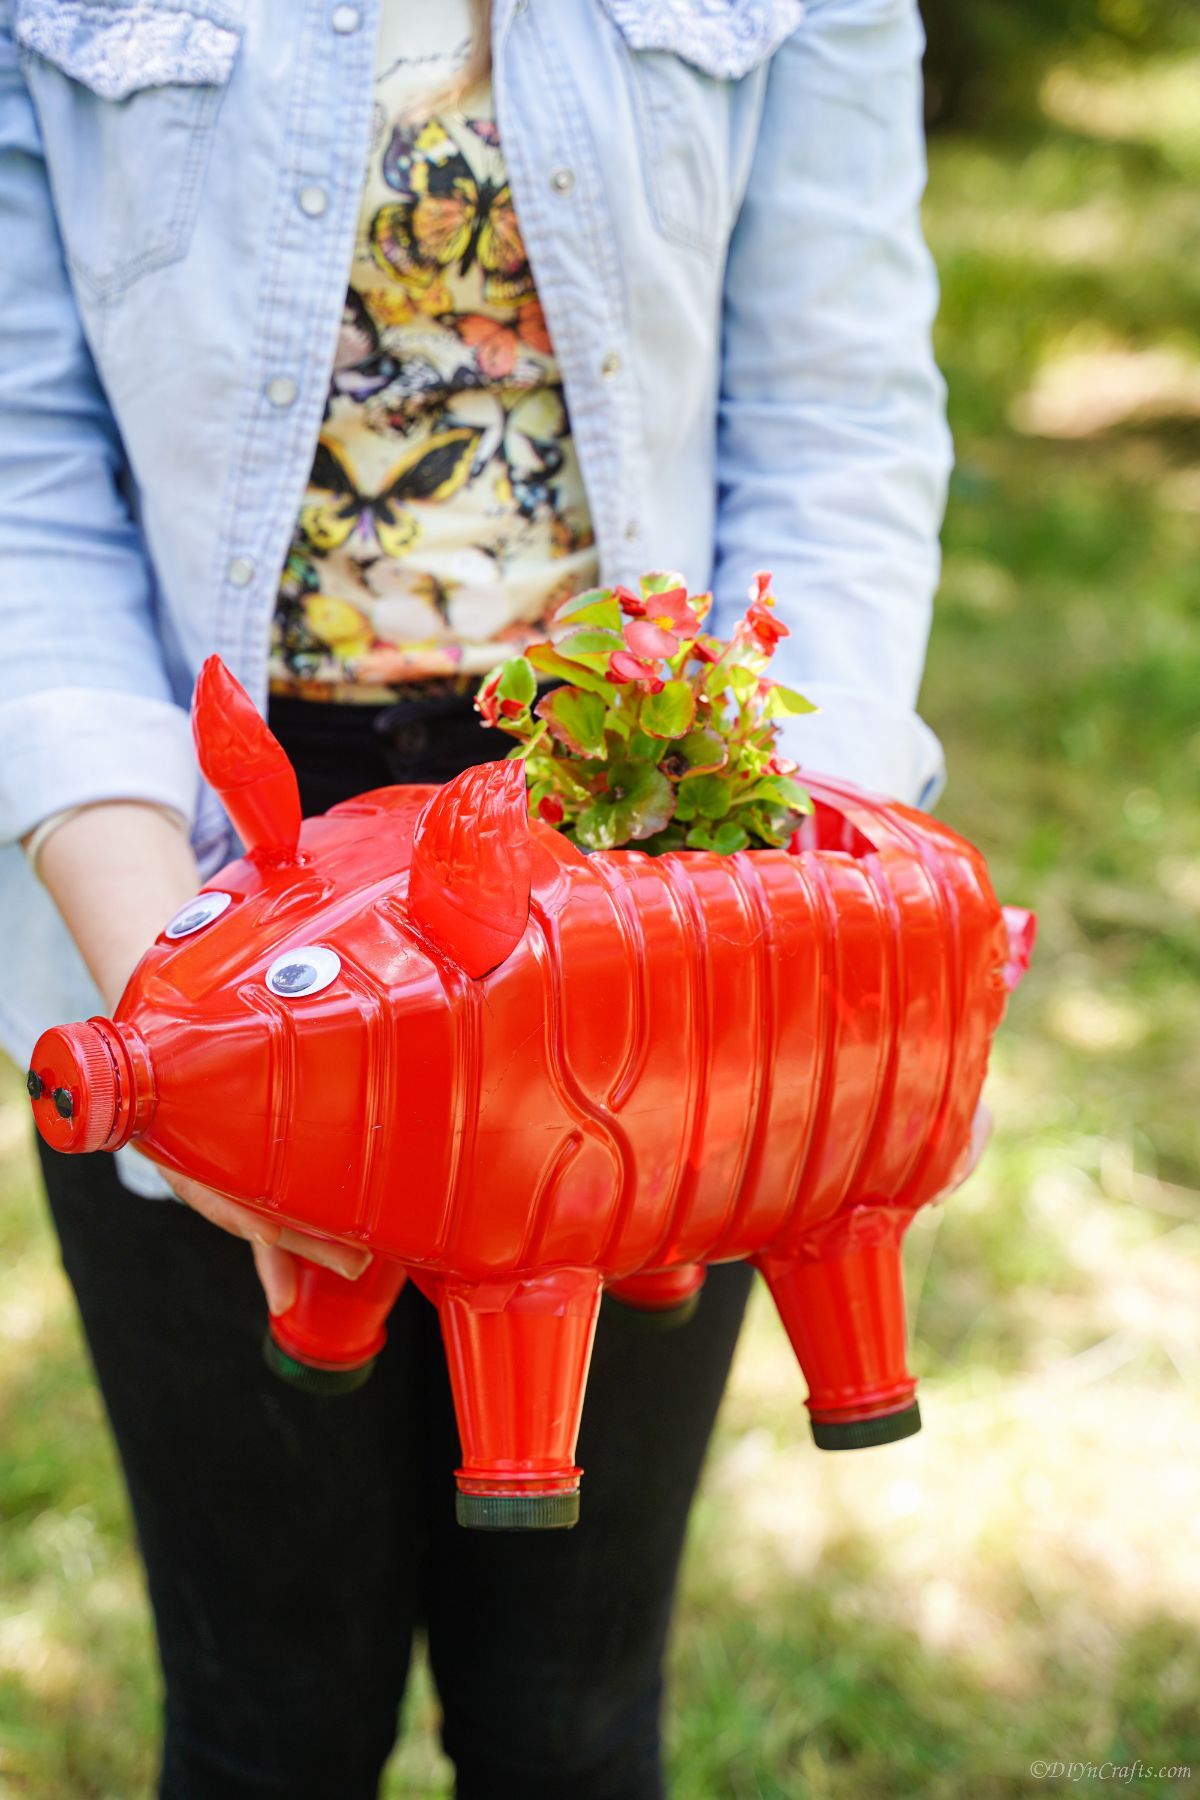 lady in blue shirt holding red pig planter with red flowers